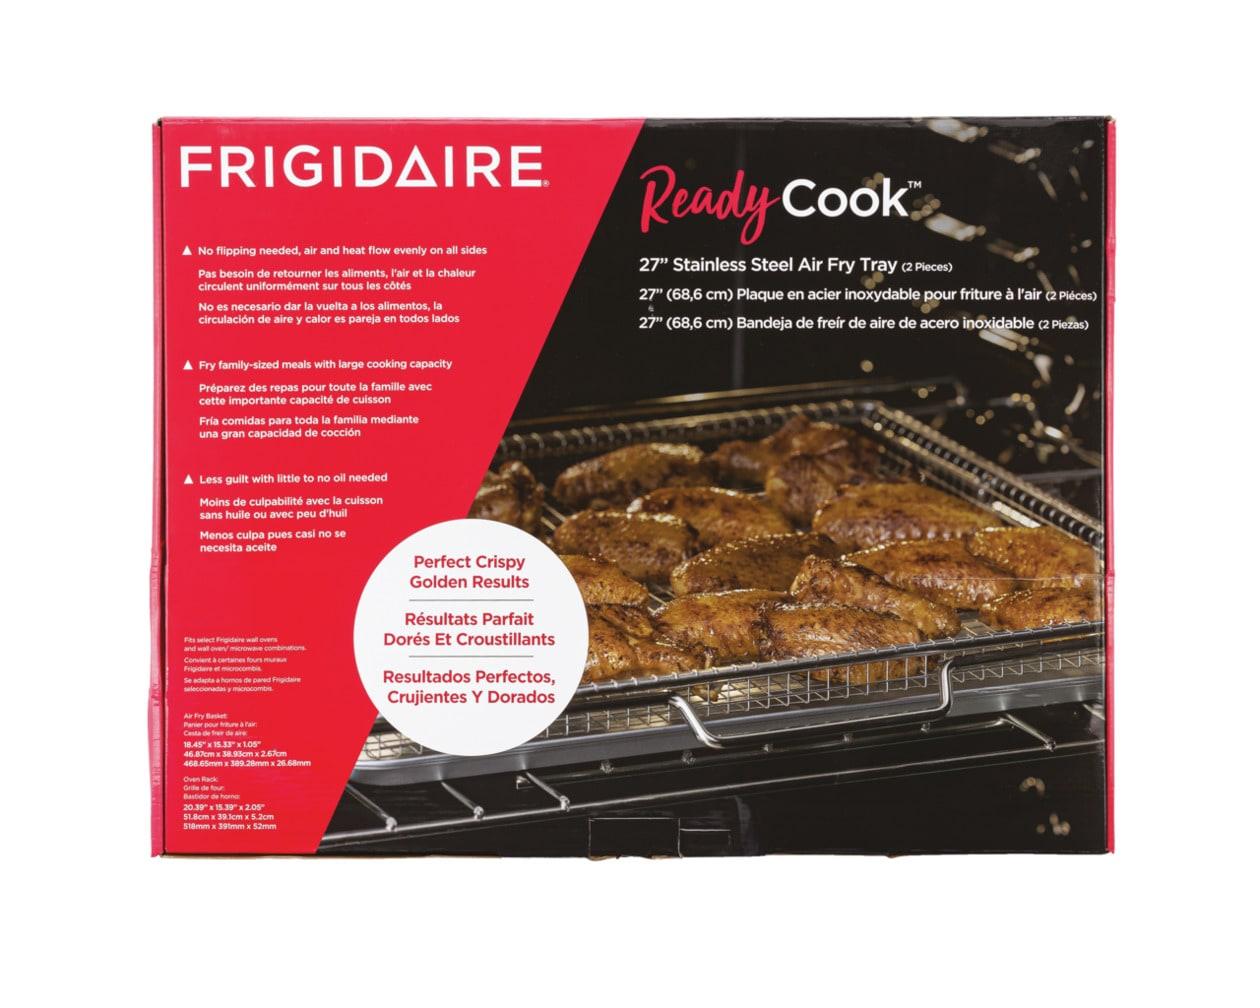 Frigidaire ReadyCook 24-Inch Wall Oven Air Fry Tray - FG24AIRFTRY